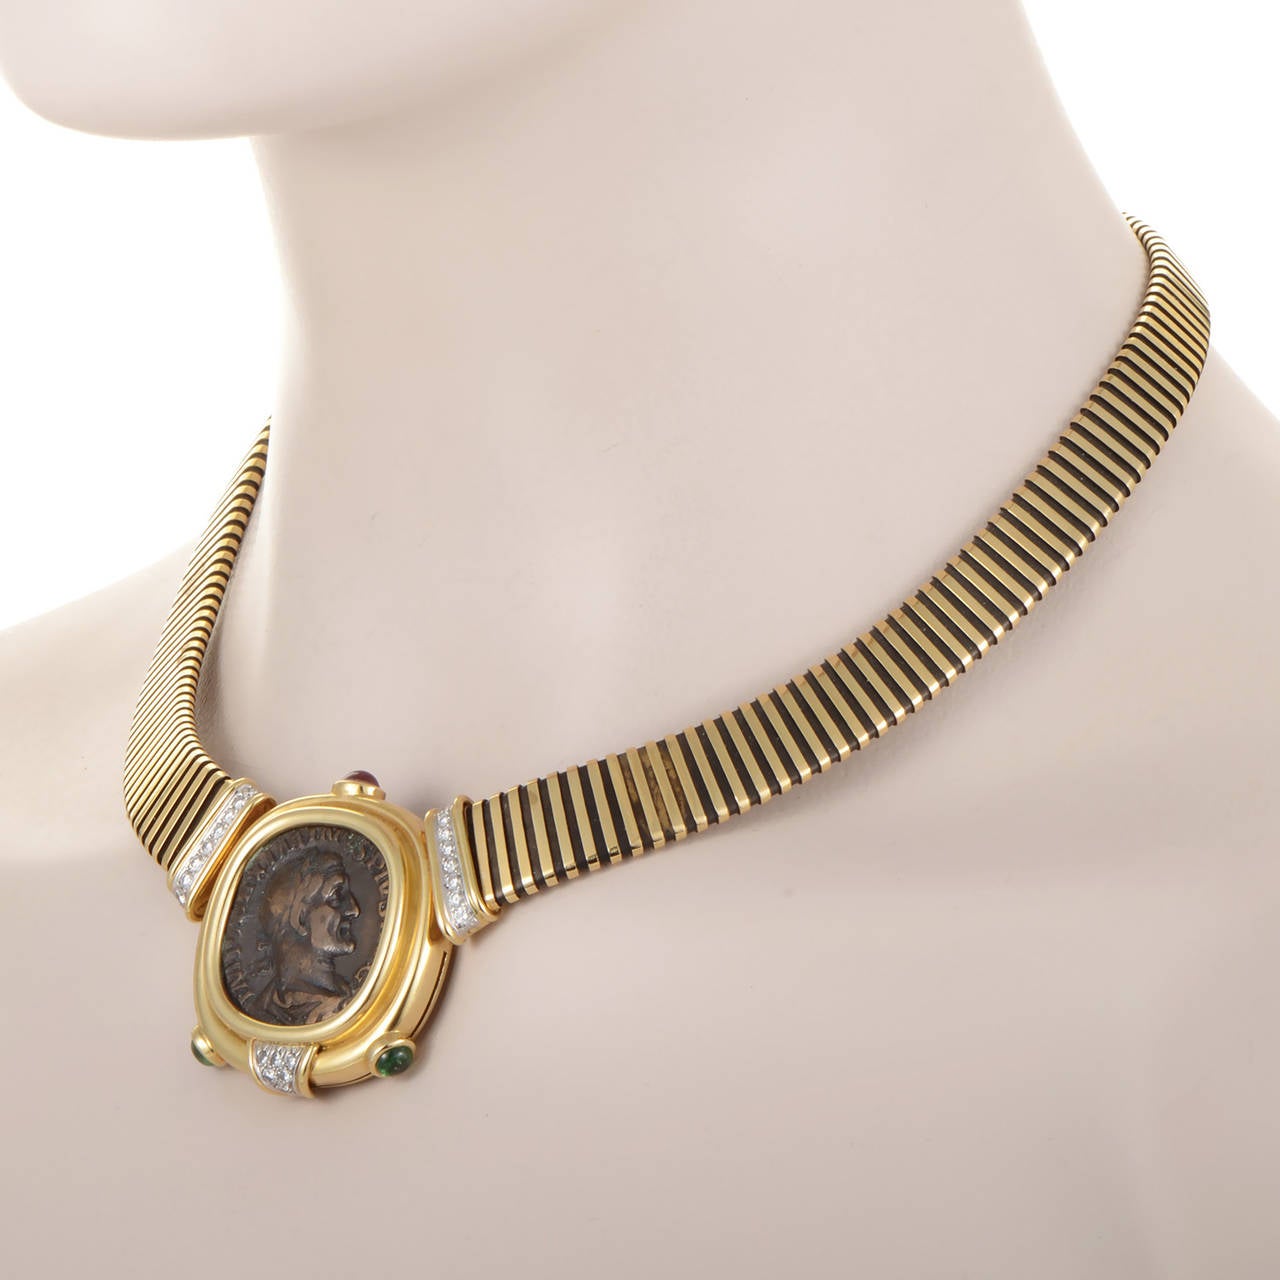 This vintage necklace from Bulgari's Monete Collection is extremely rare and is perfect for a serious jewelry aficianado. The necklace is made of a combination of 18K yellow gold and platinum that comes together at a yellow gold pendant. The pendant